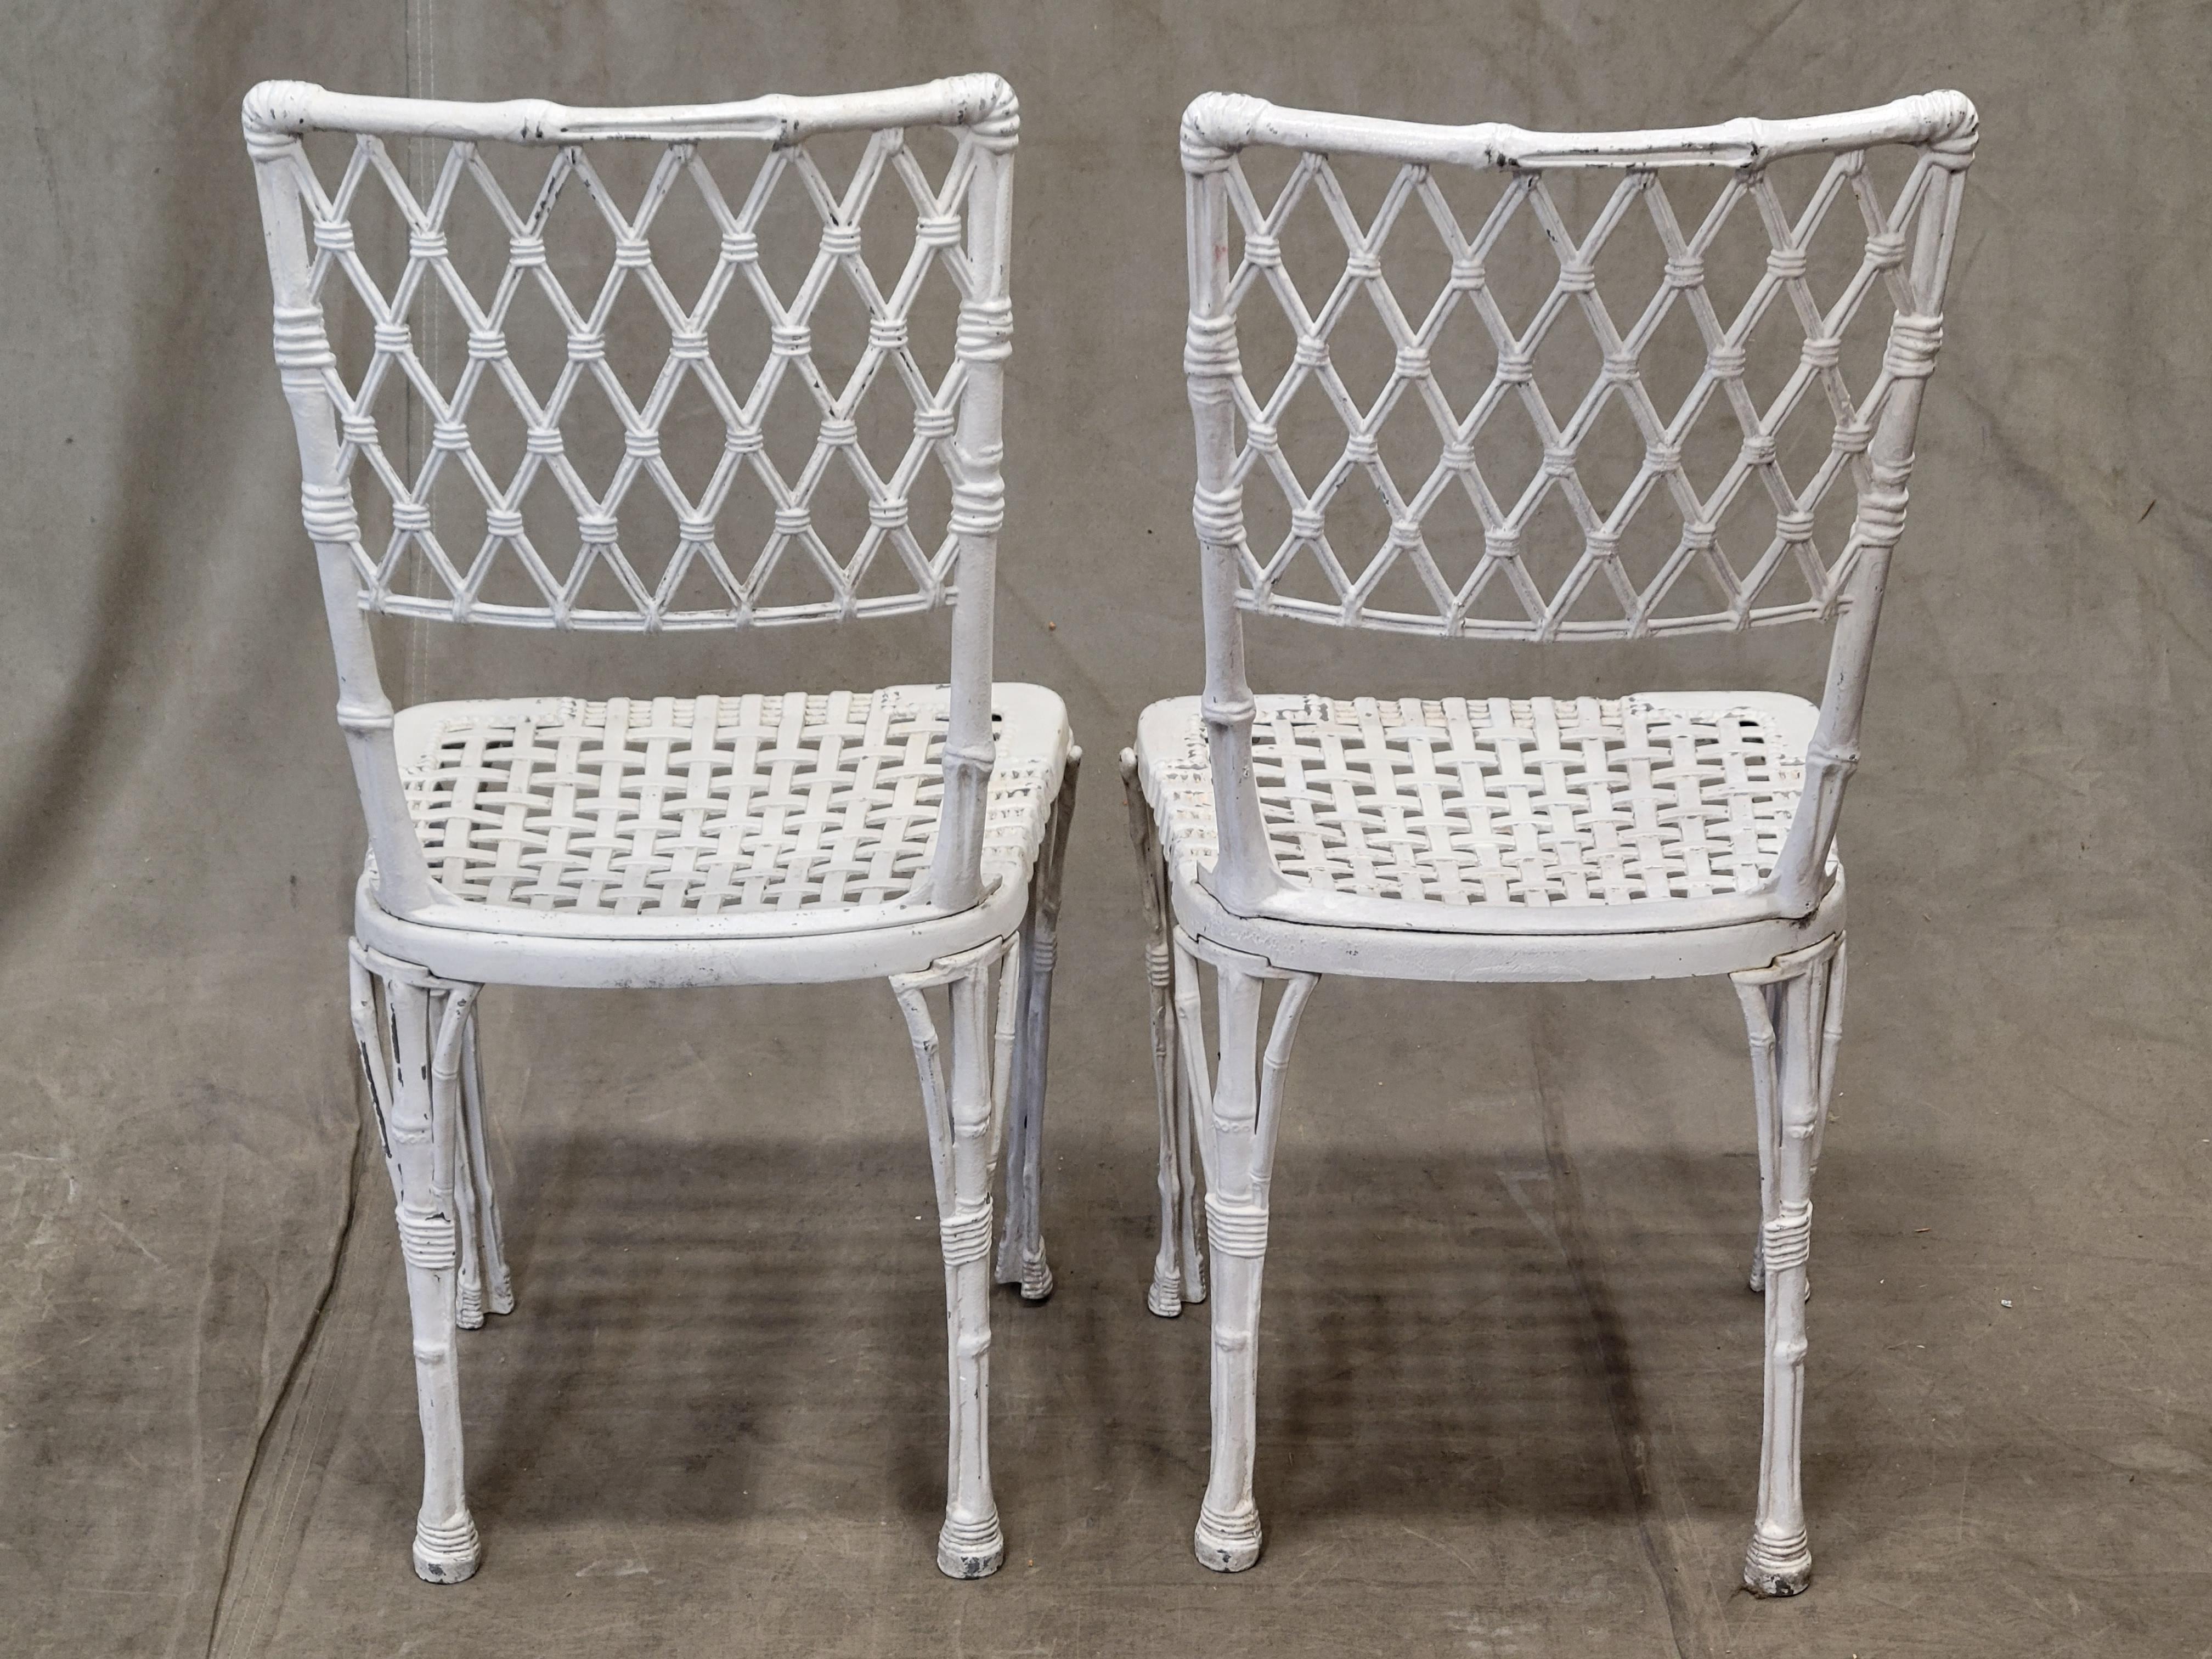 Vintage French Cast Aluminum Chinoiserie Faux Bamboo Garden Chairs - Set of 6 2